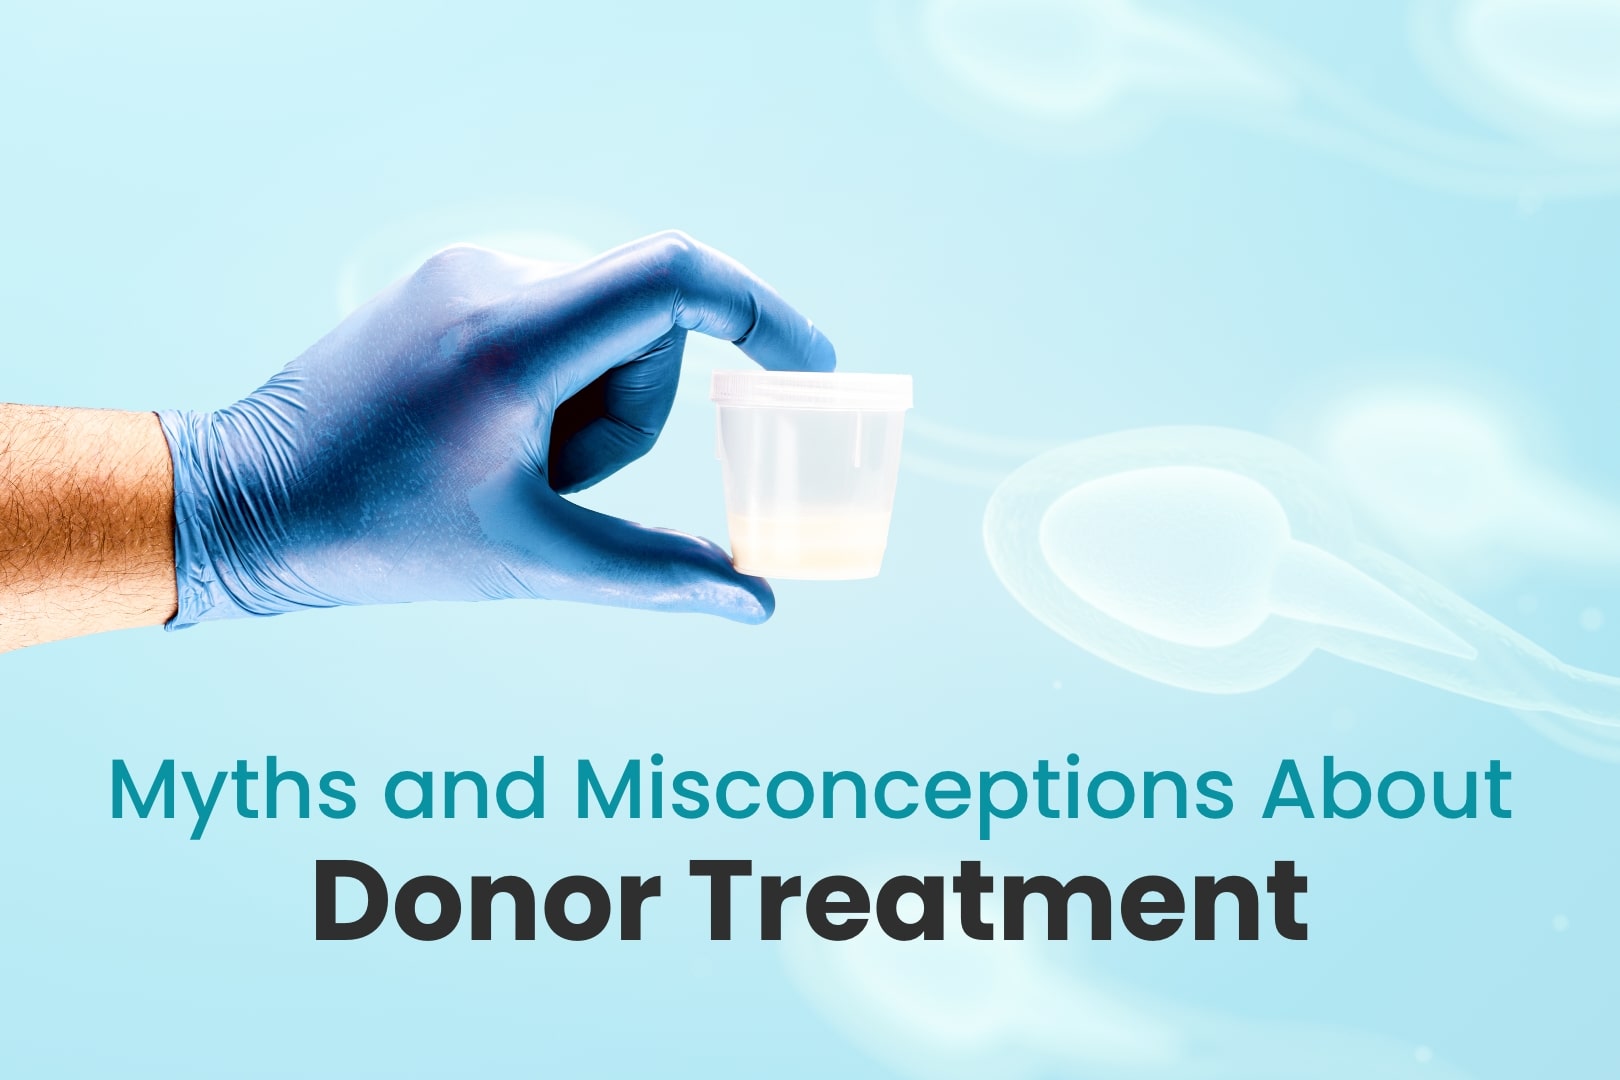 Myths and Misconceptions About Donor Treatment